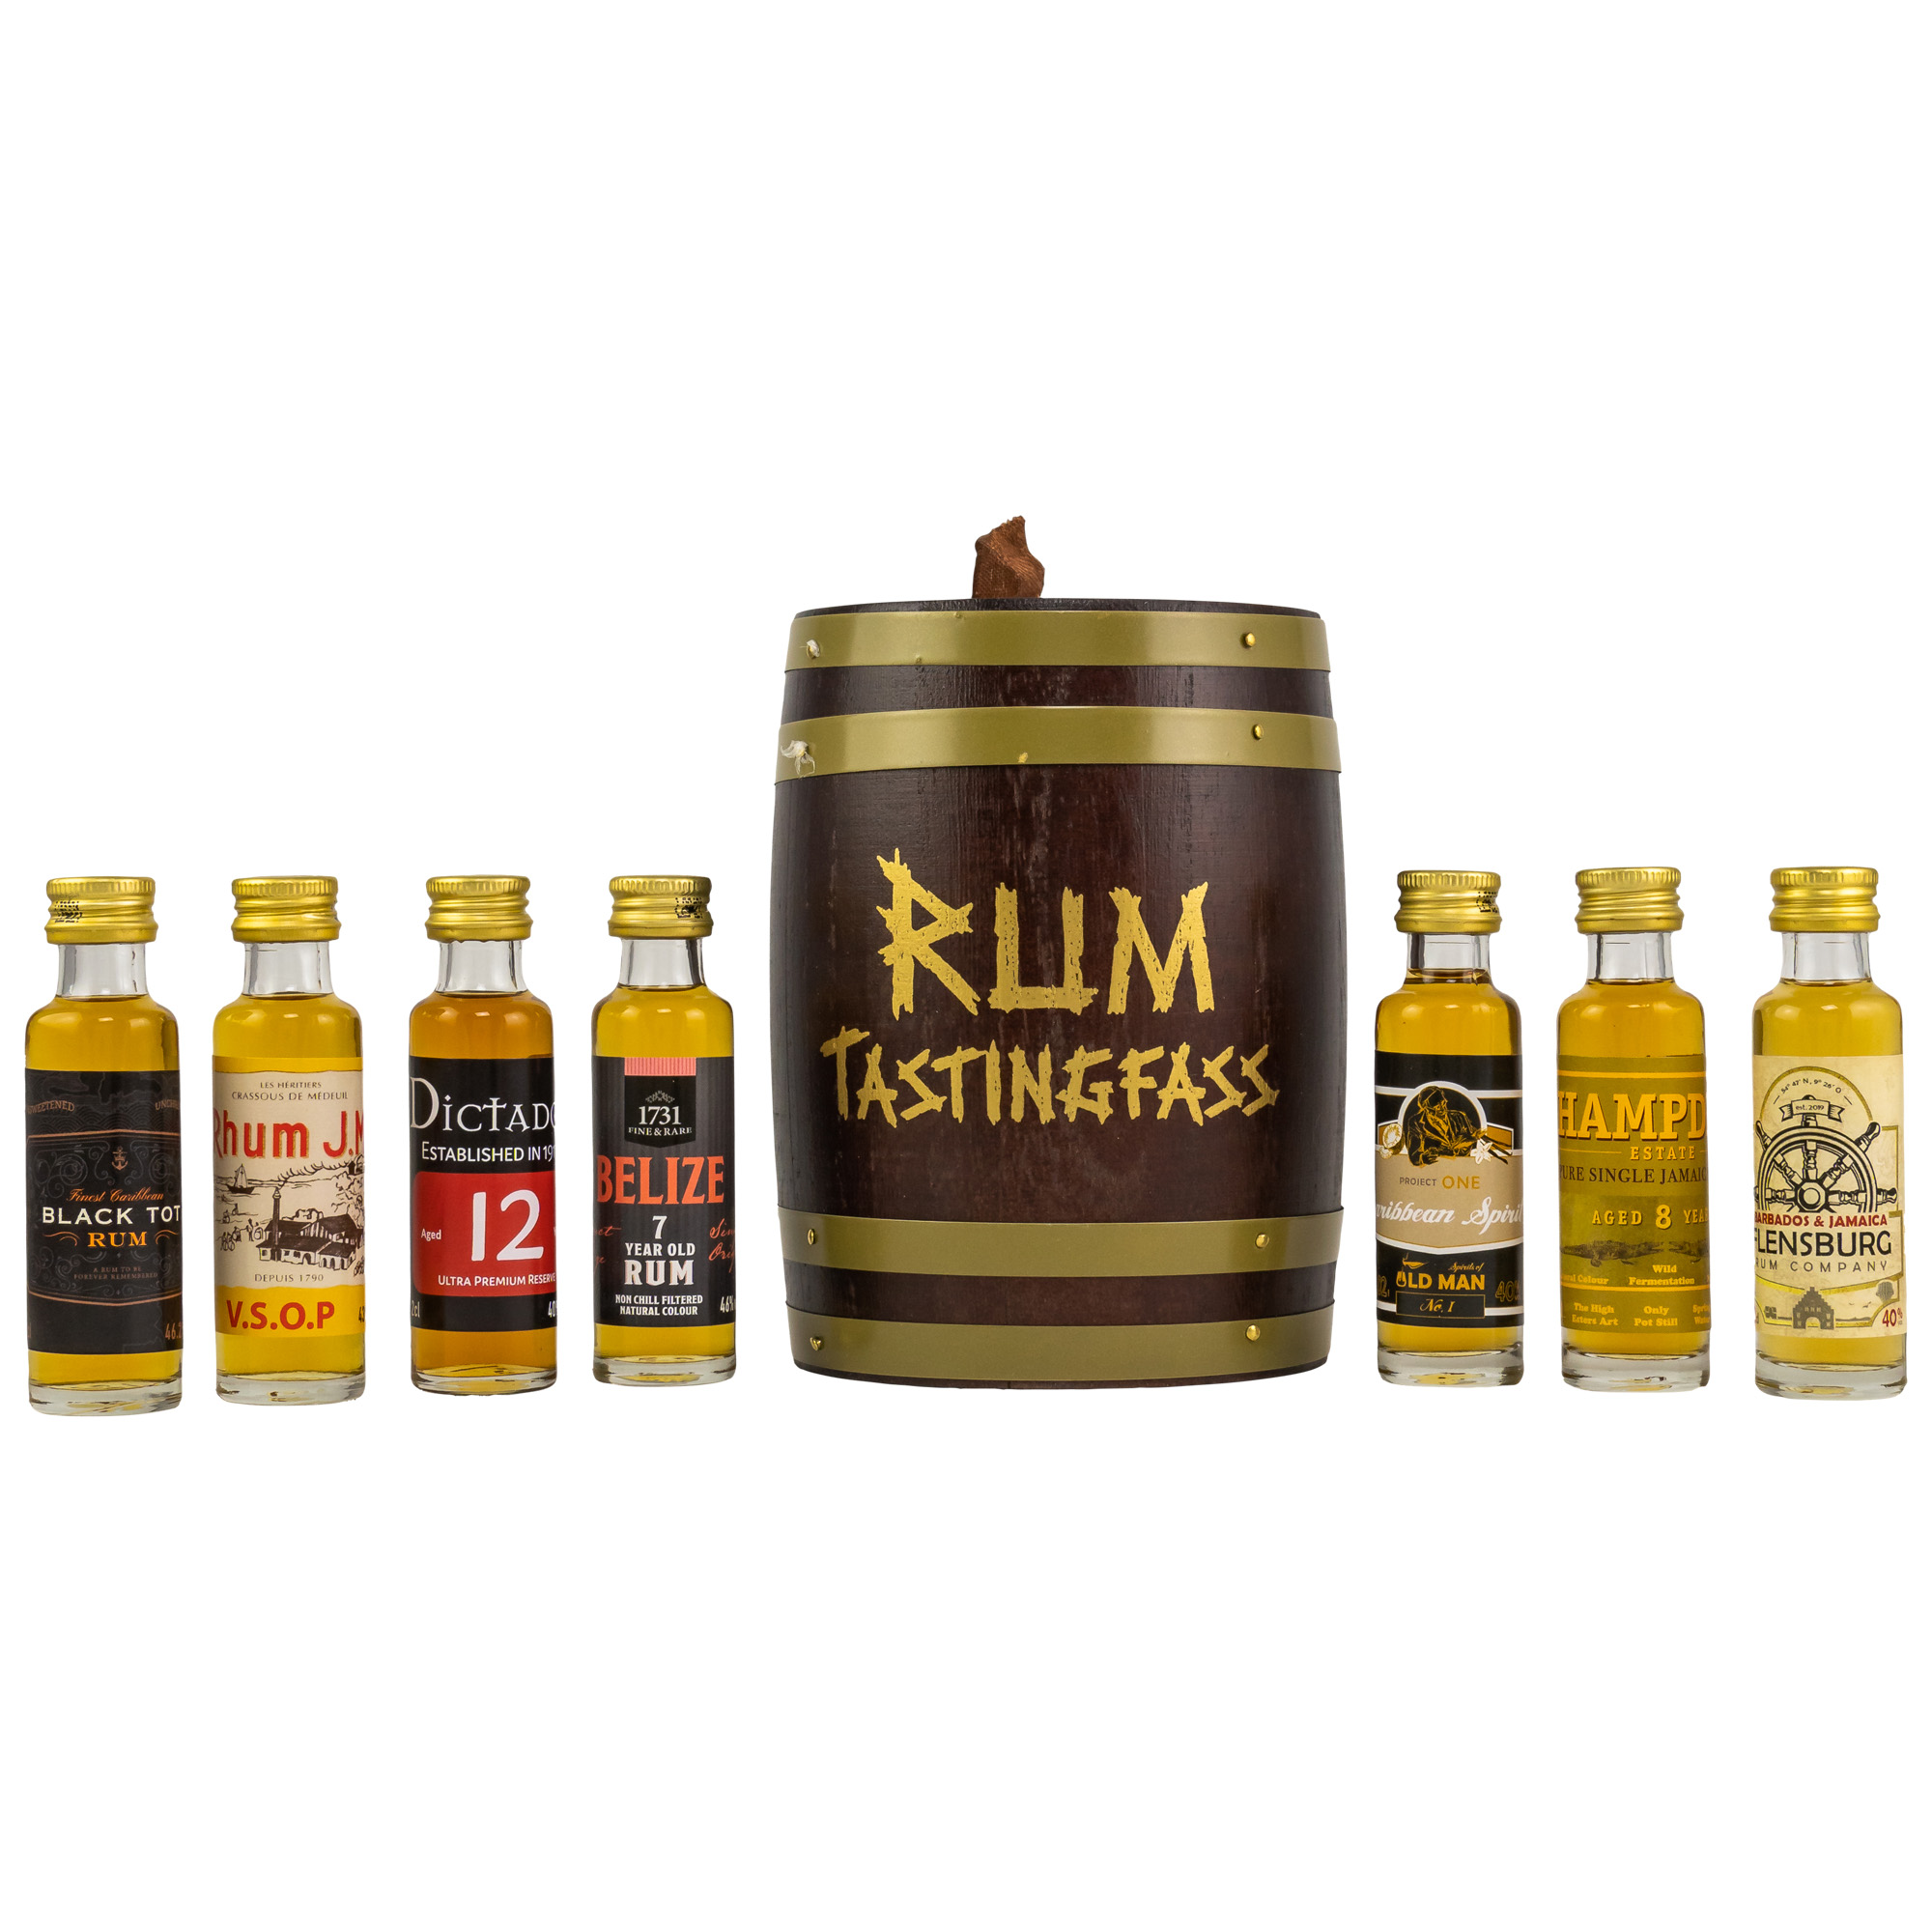 Rum - Tasting - Fass - Sortiment 7 x 2 cl.